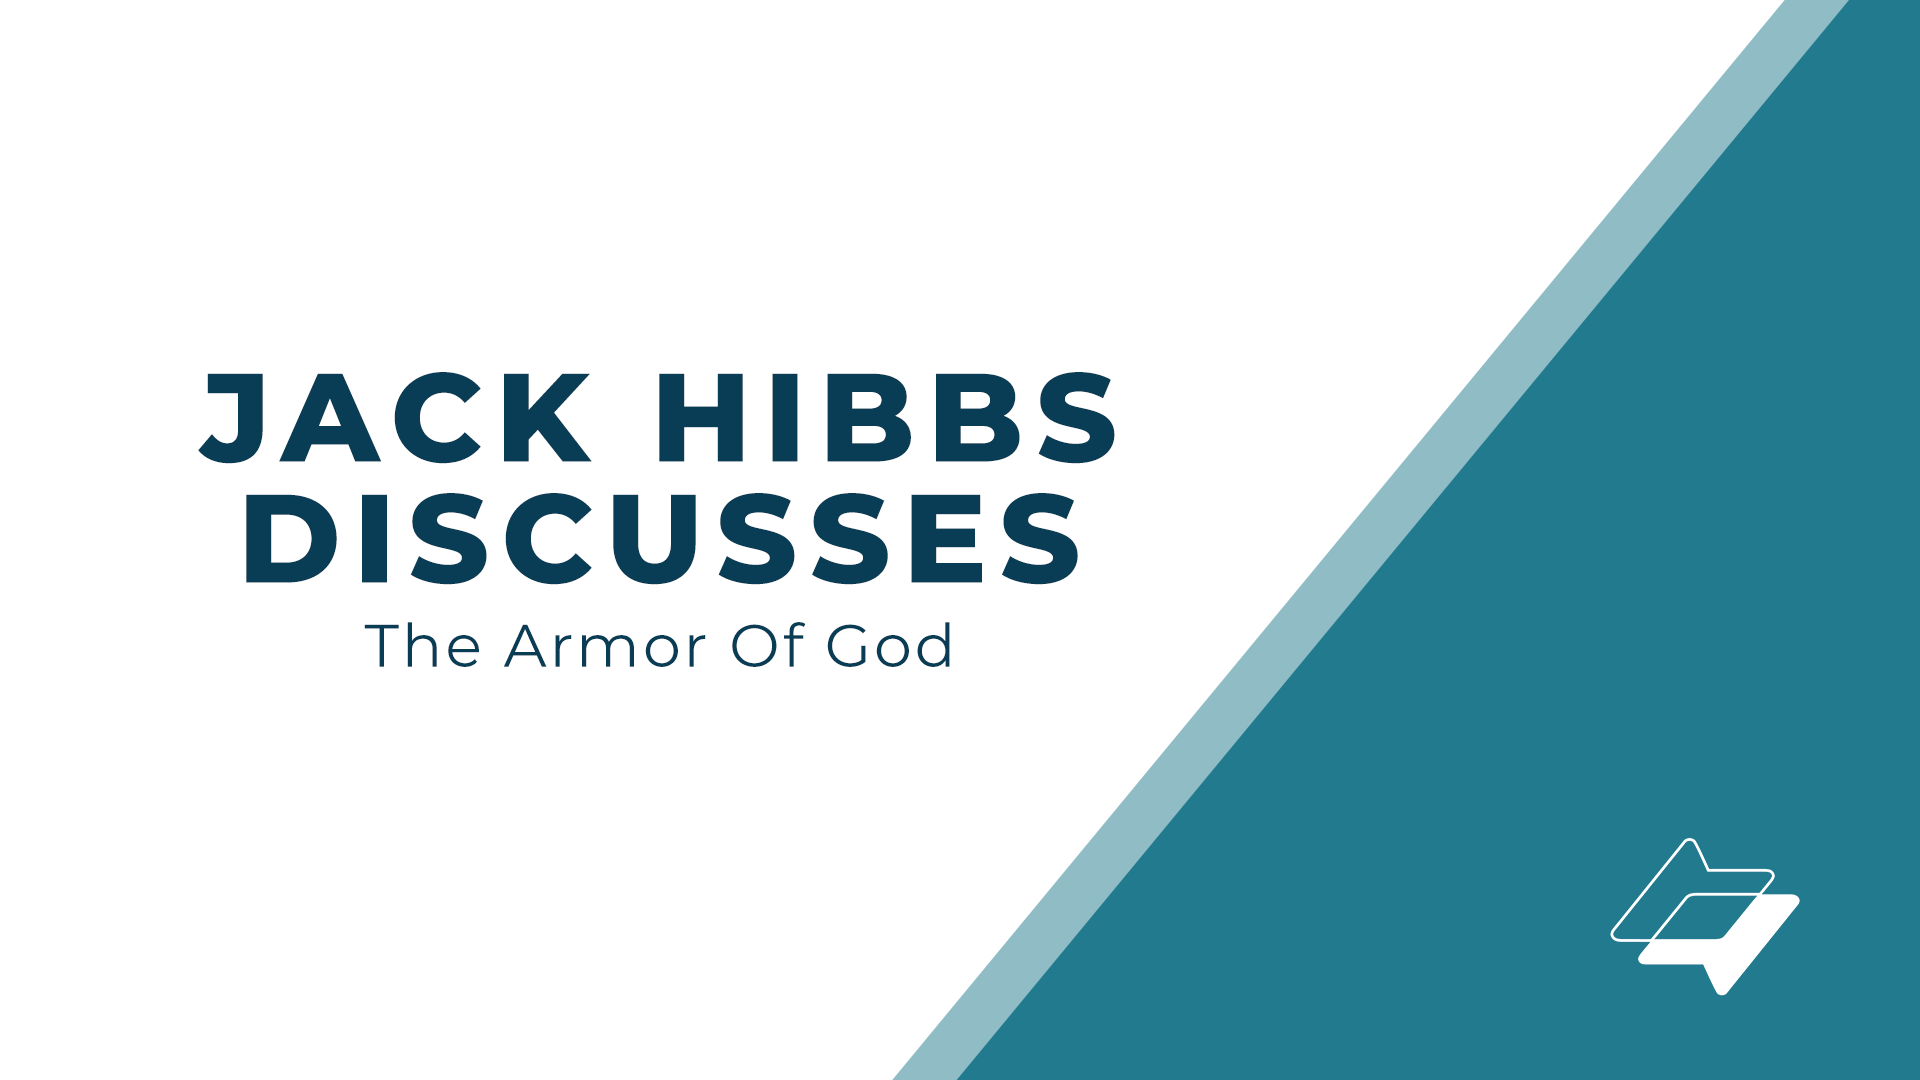 Jack Hibbs discusses The Armor of God